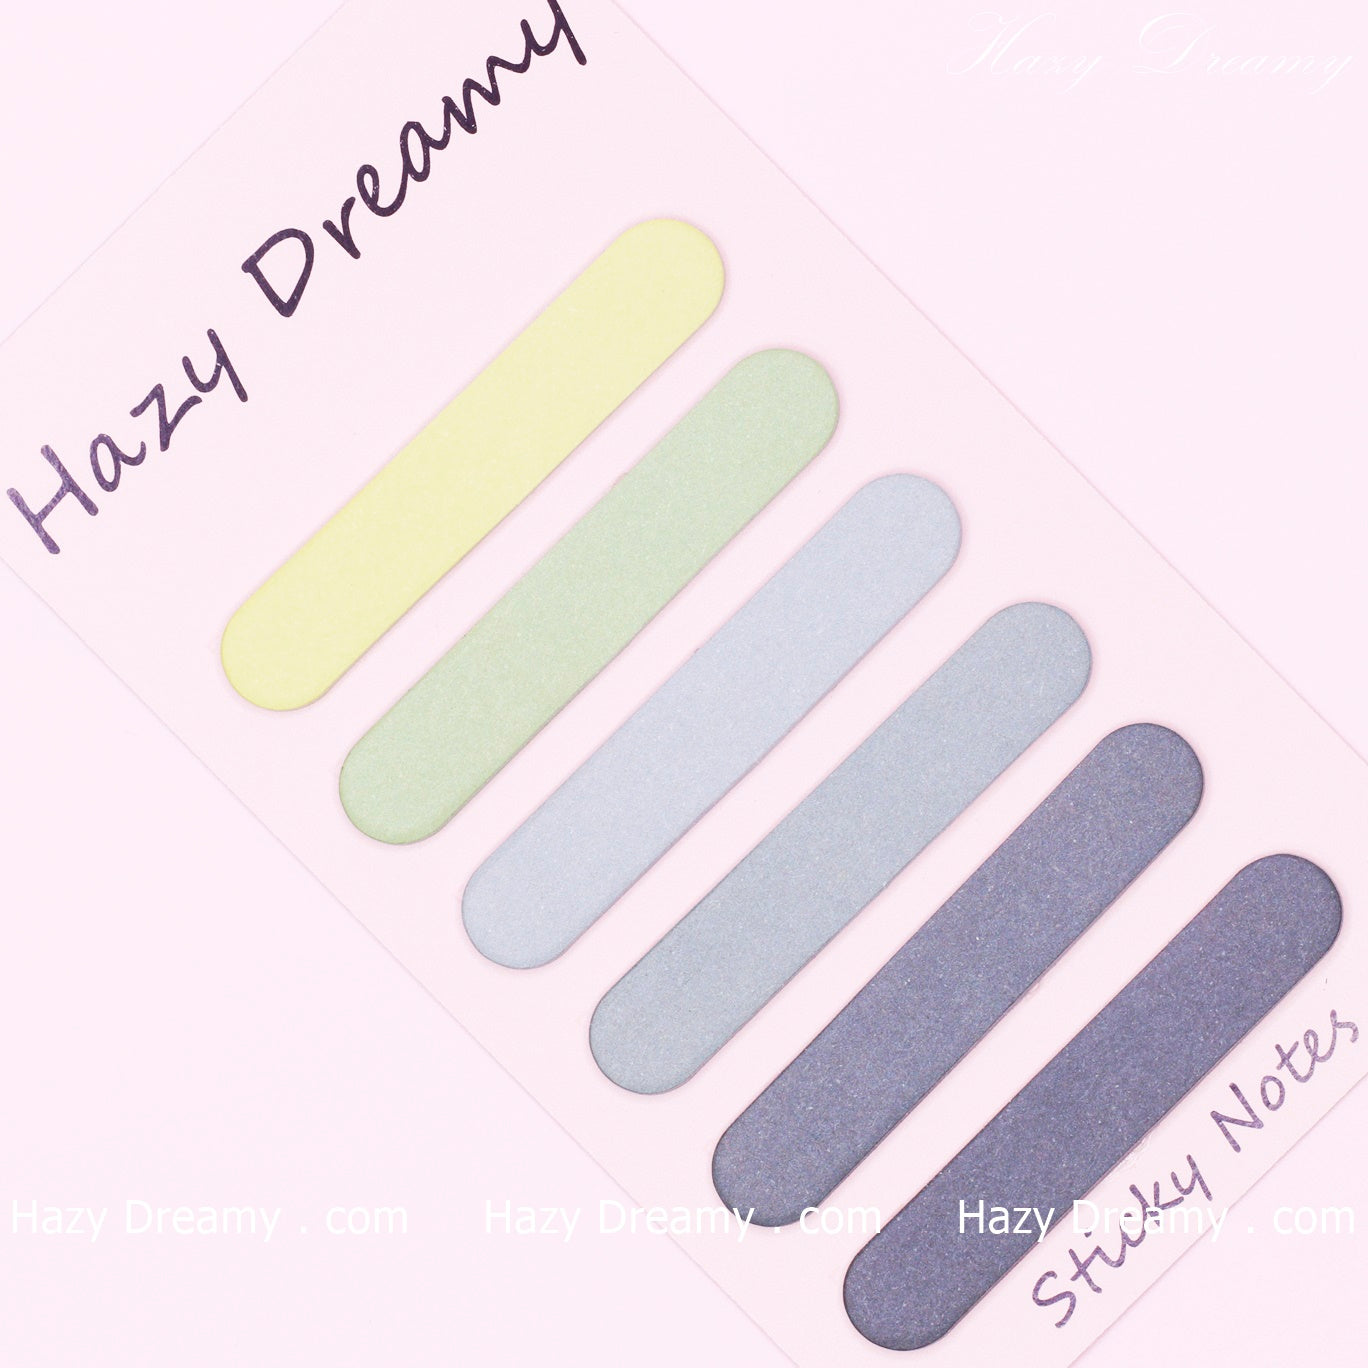 Cute Creative Round Shape Sticky Notes Notebook, Classic Tear-Off Memo Pad